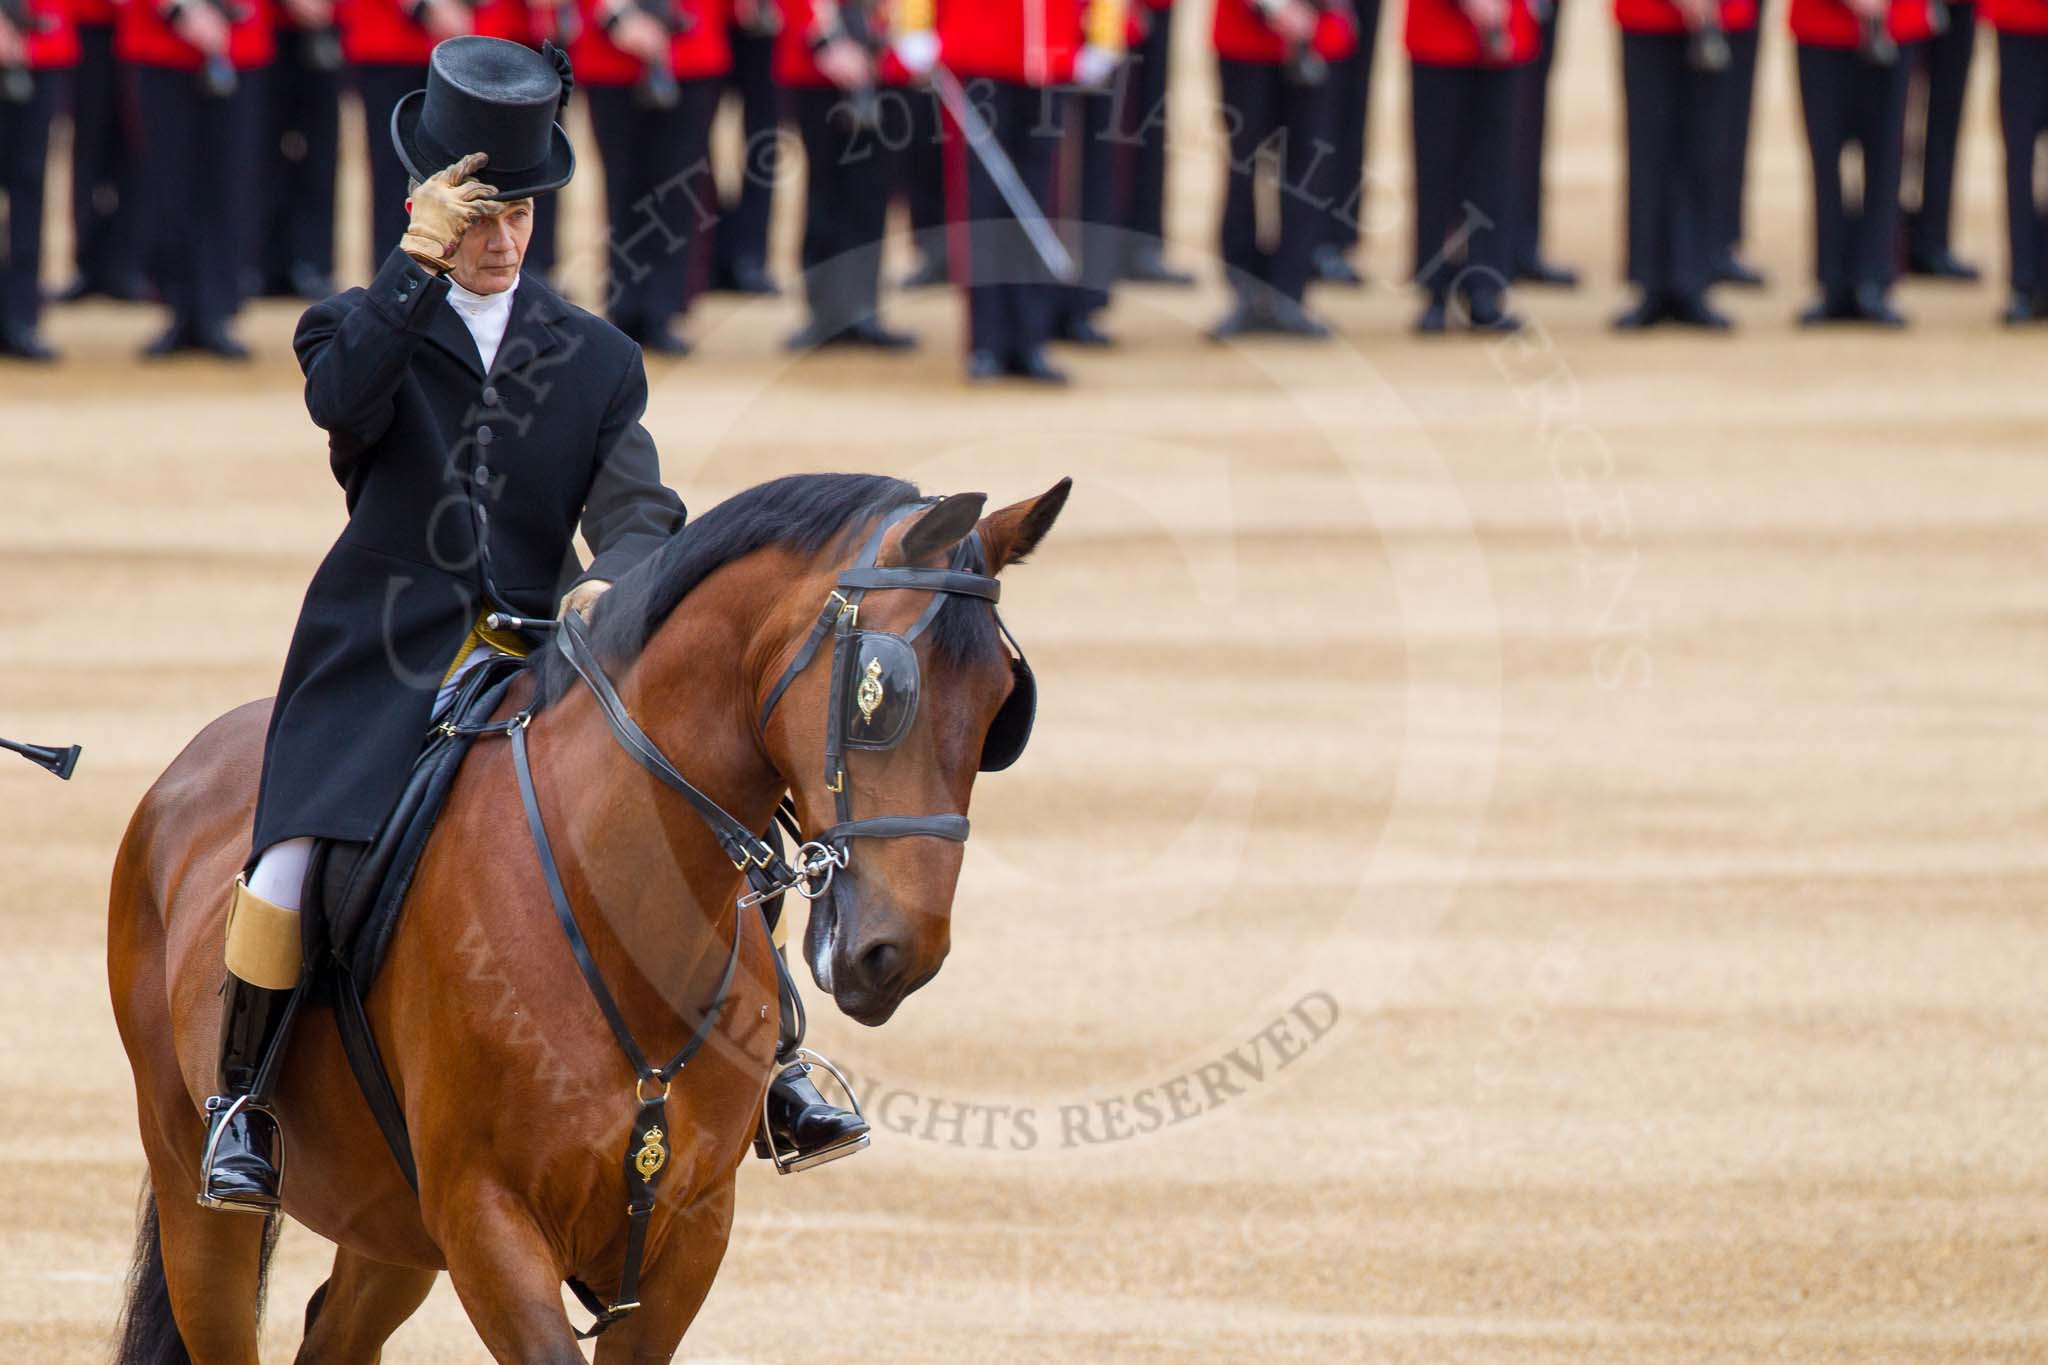 Major General's Review 2013: Two grooms are leading the line of carriages that will carry members of the Royal Family across Horse Guards Parade..
Horse Guards Parade, Westminster,
London SW1,

United Kingdom,
on 01 June 2013 at 10:51, image #204